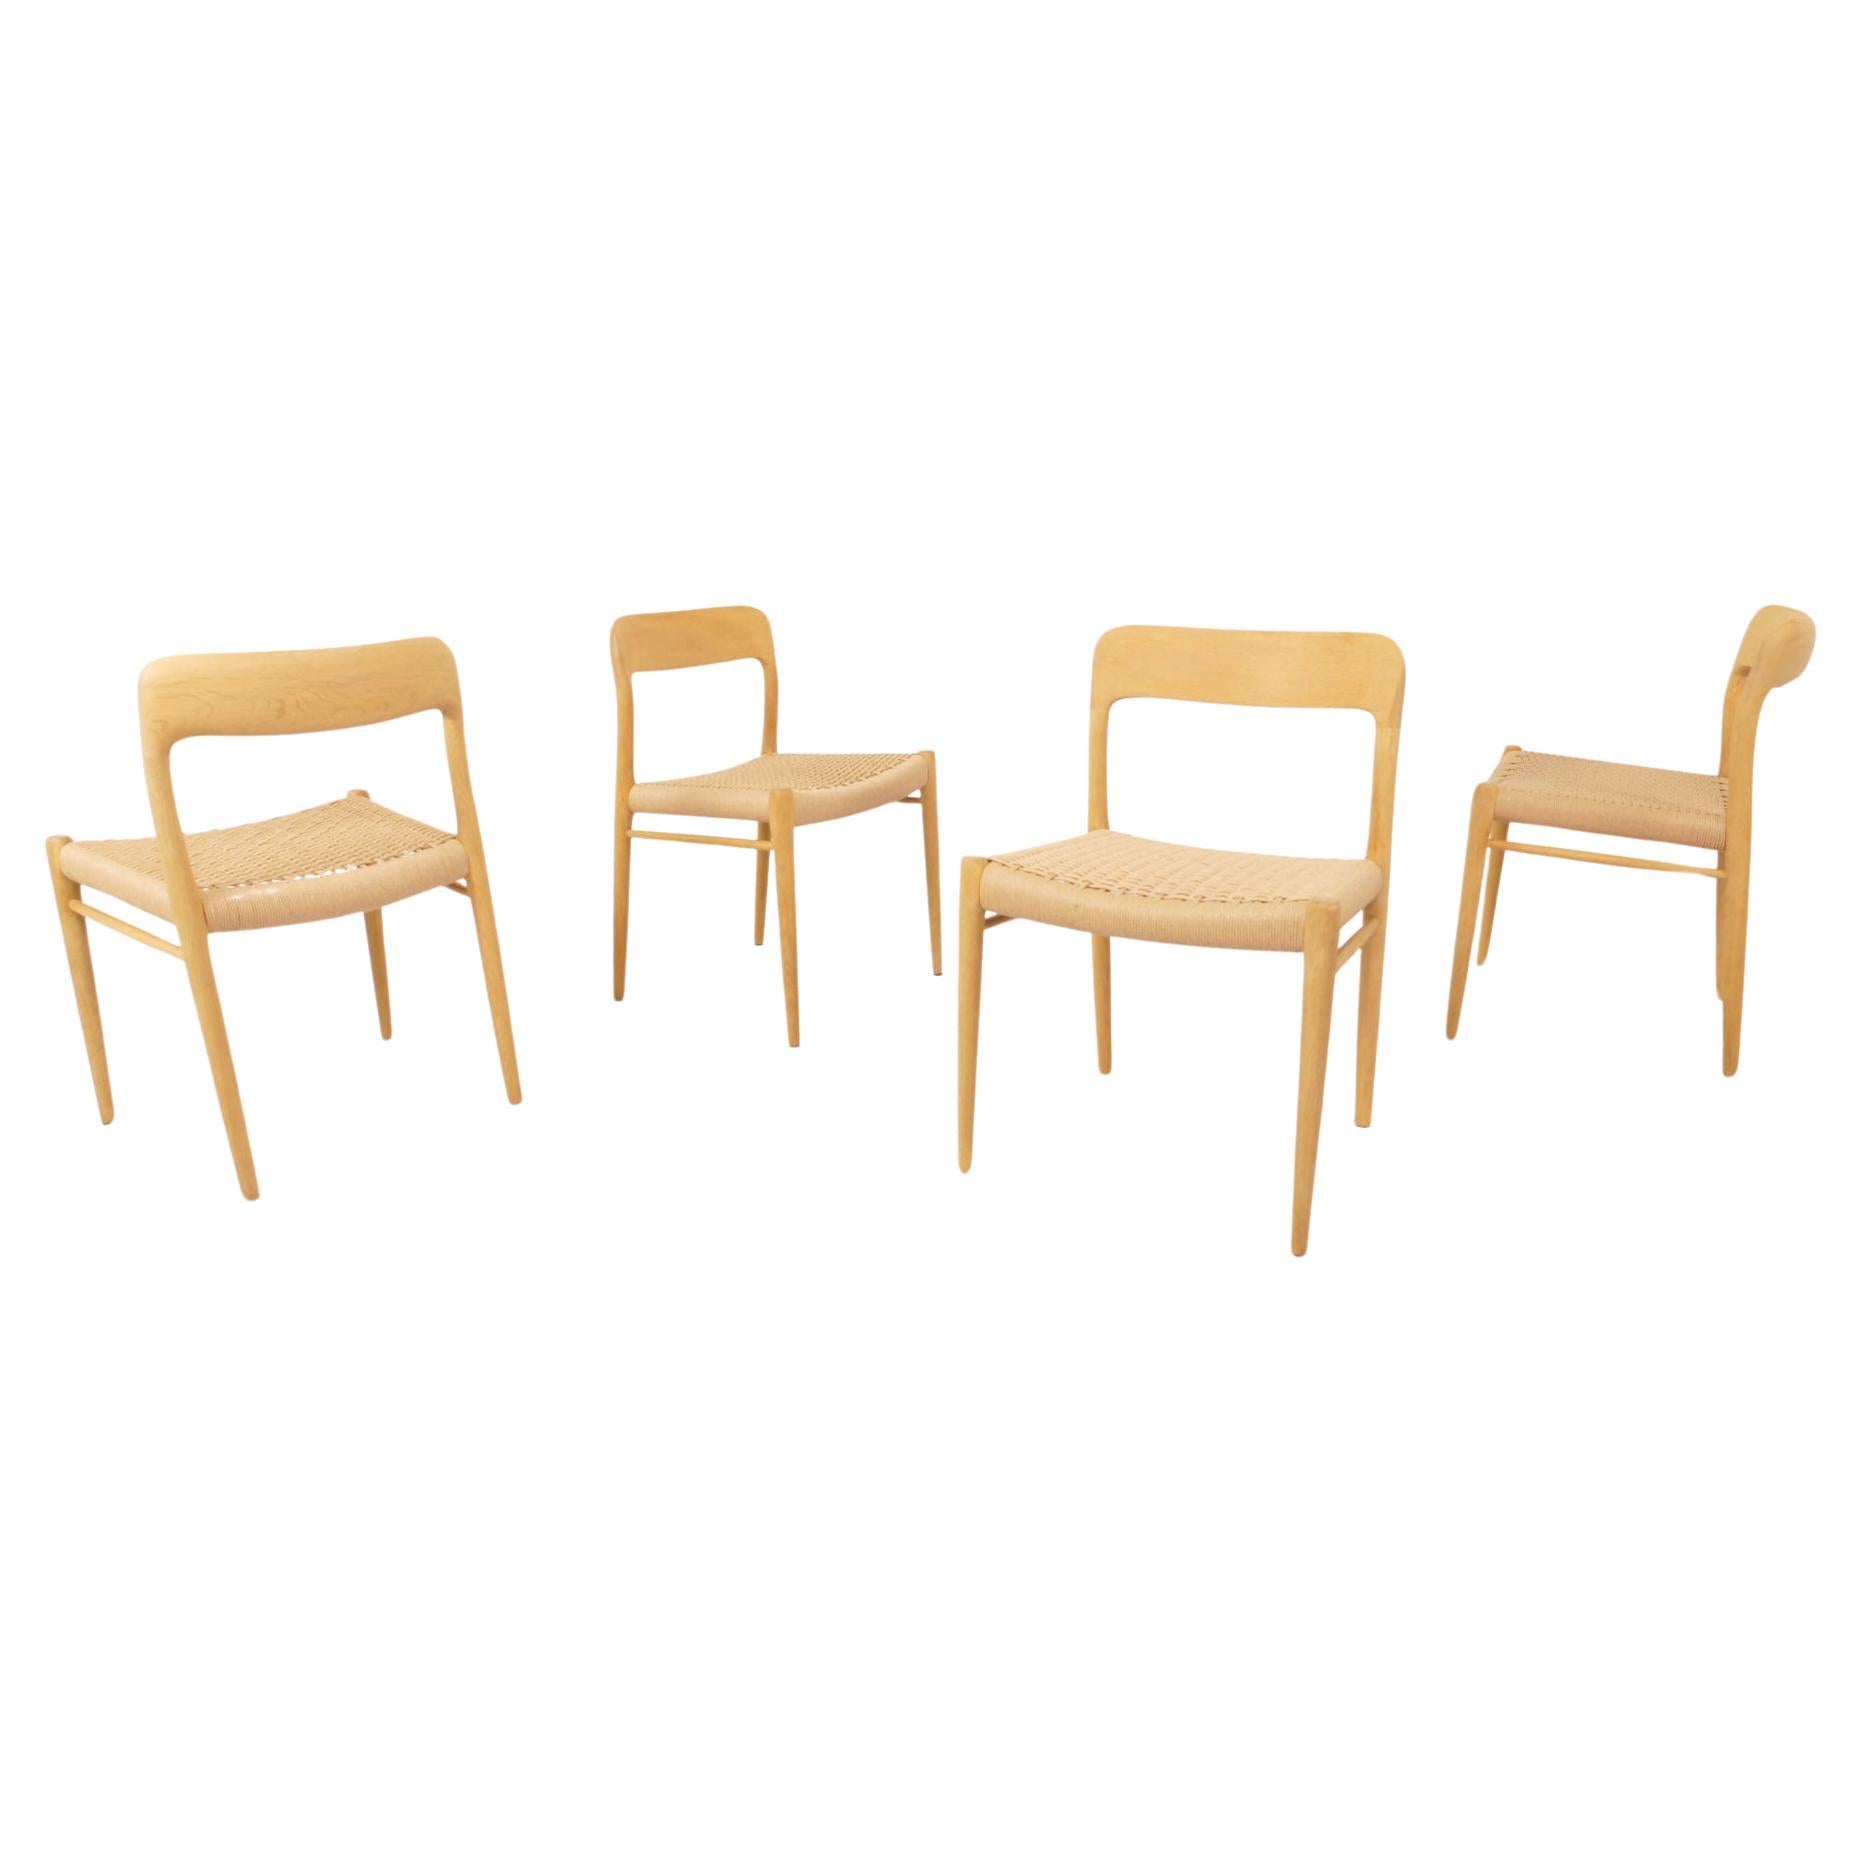 Set of 4 vintage dining chairs  Niels Otto Møller  Model 75  Papercord Oak